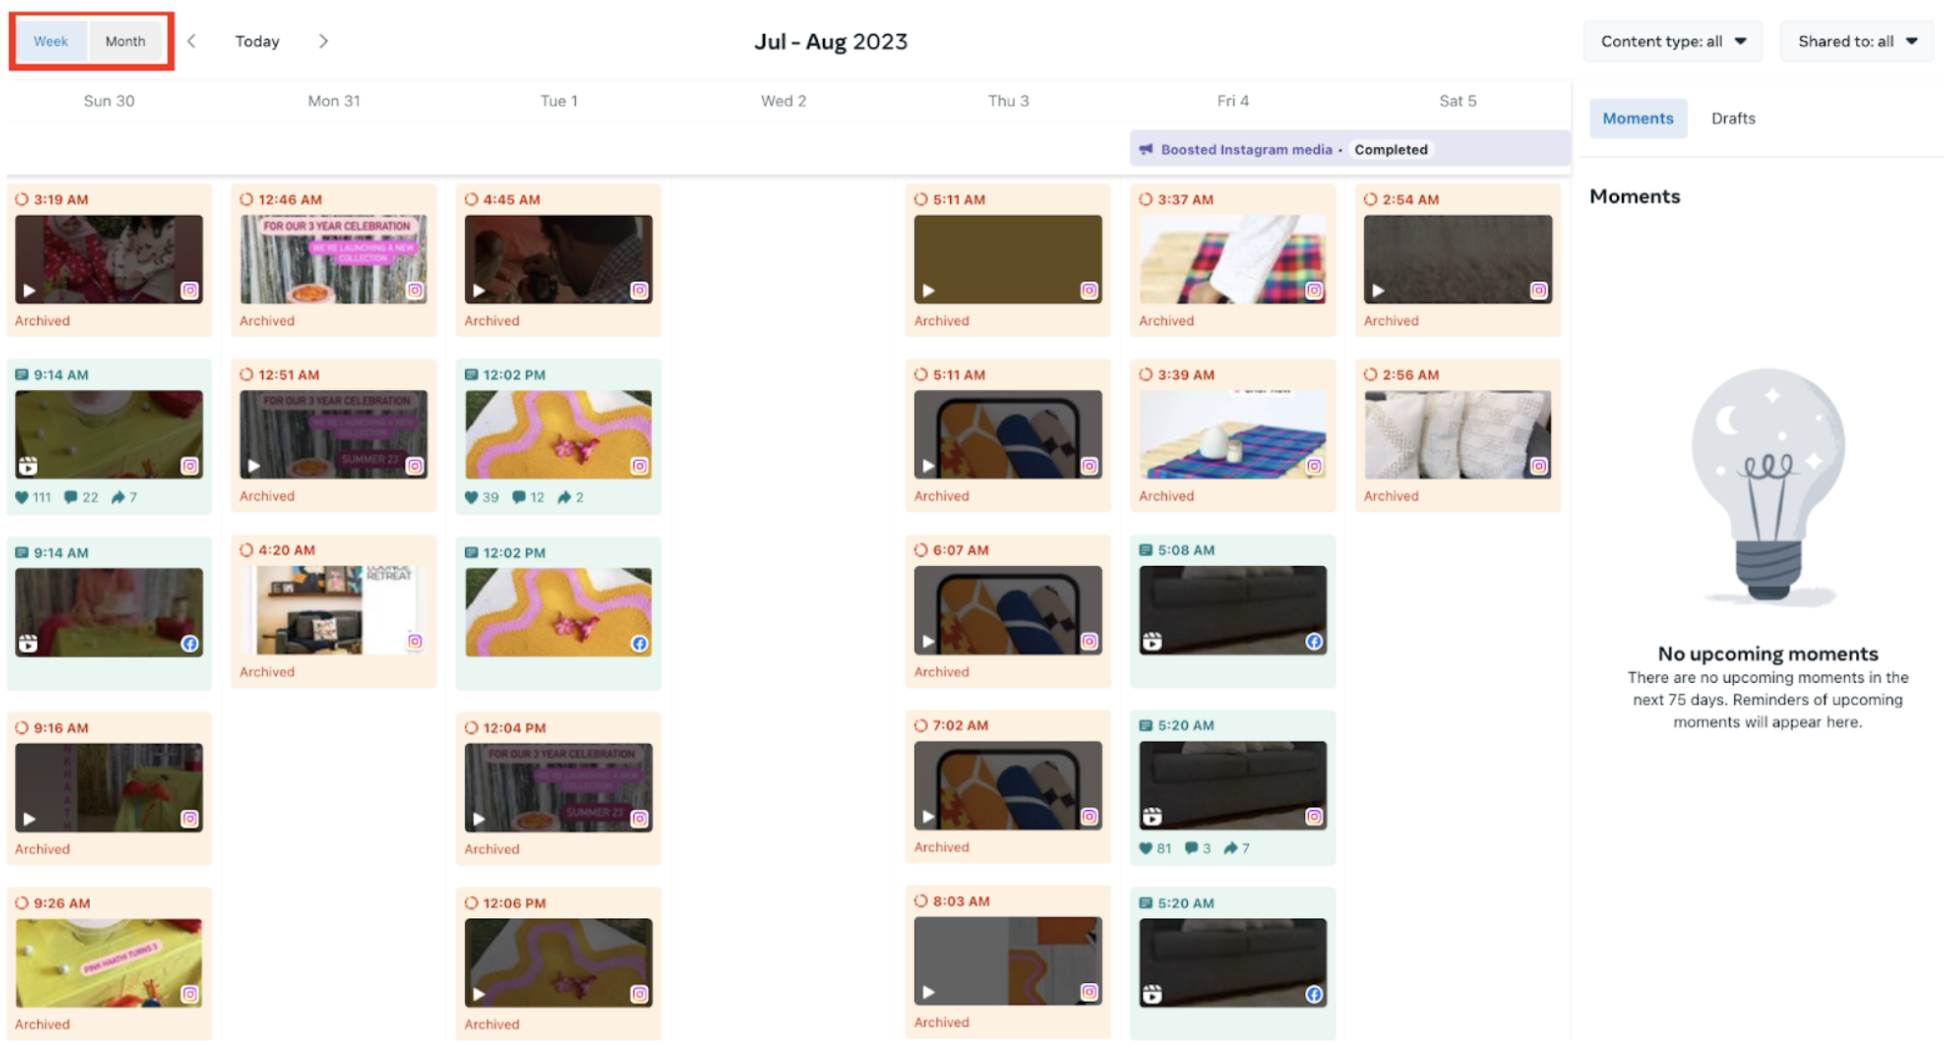 Weekly Planner view in Creator Studio. The image shows the content planned from July to August 2023.